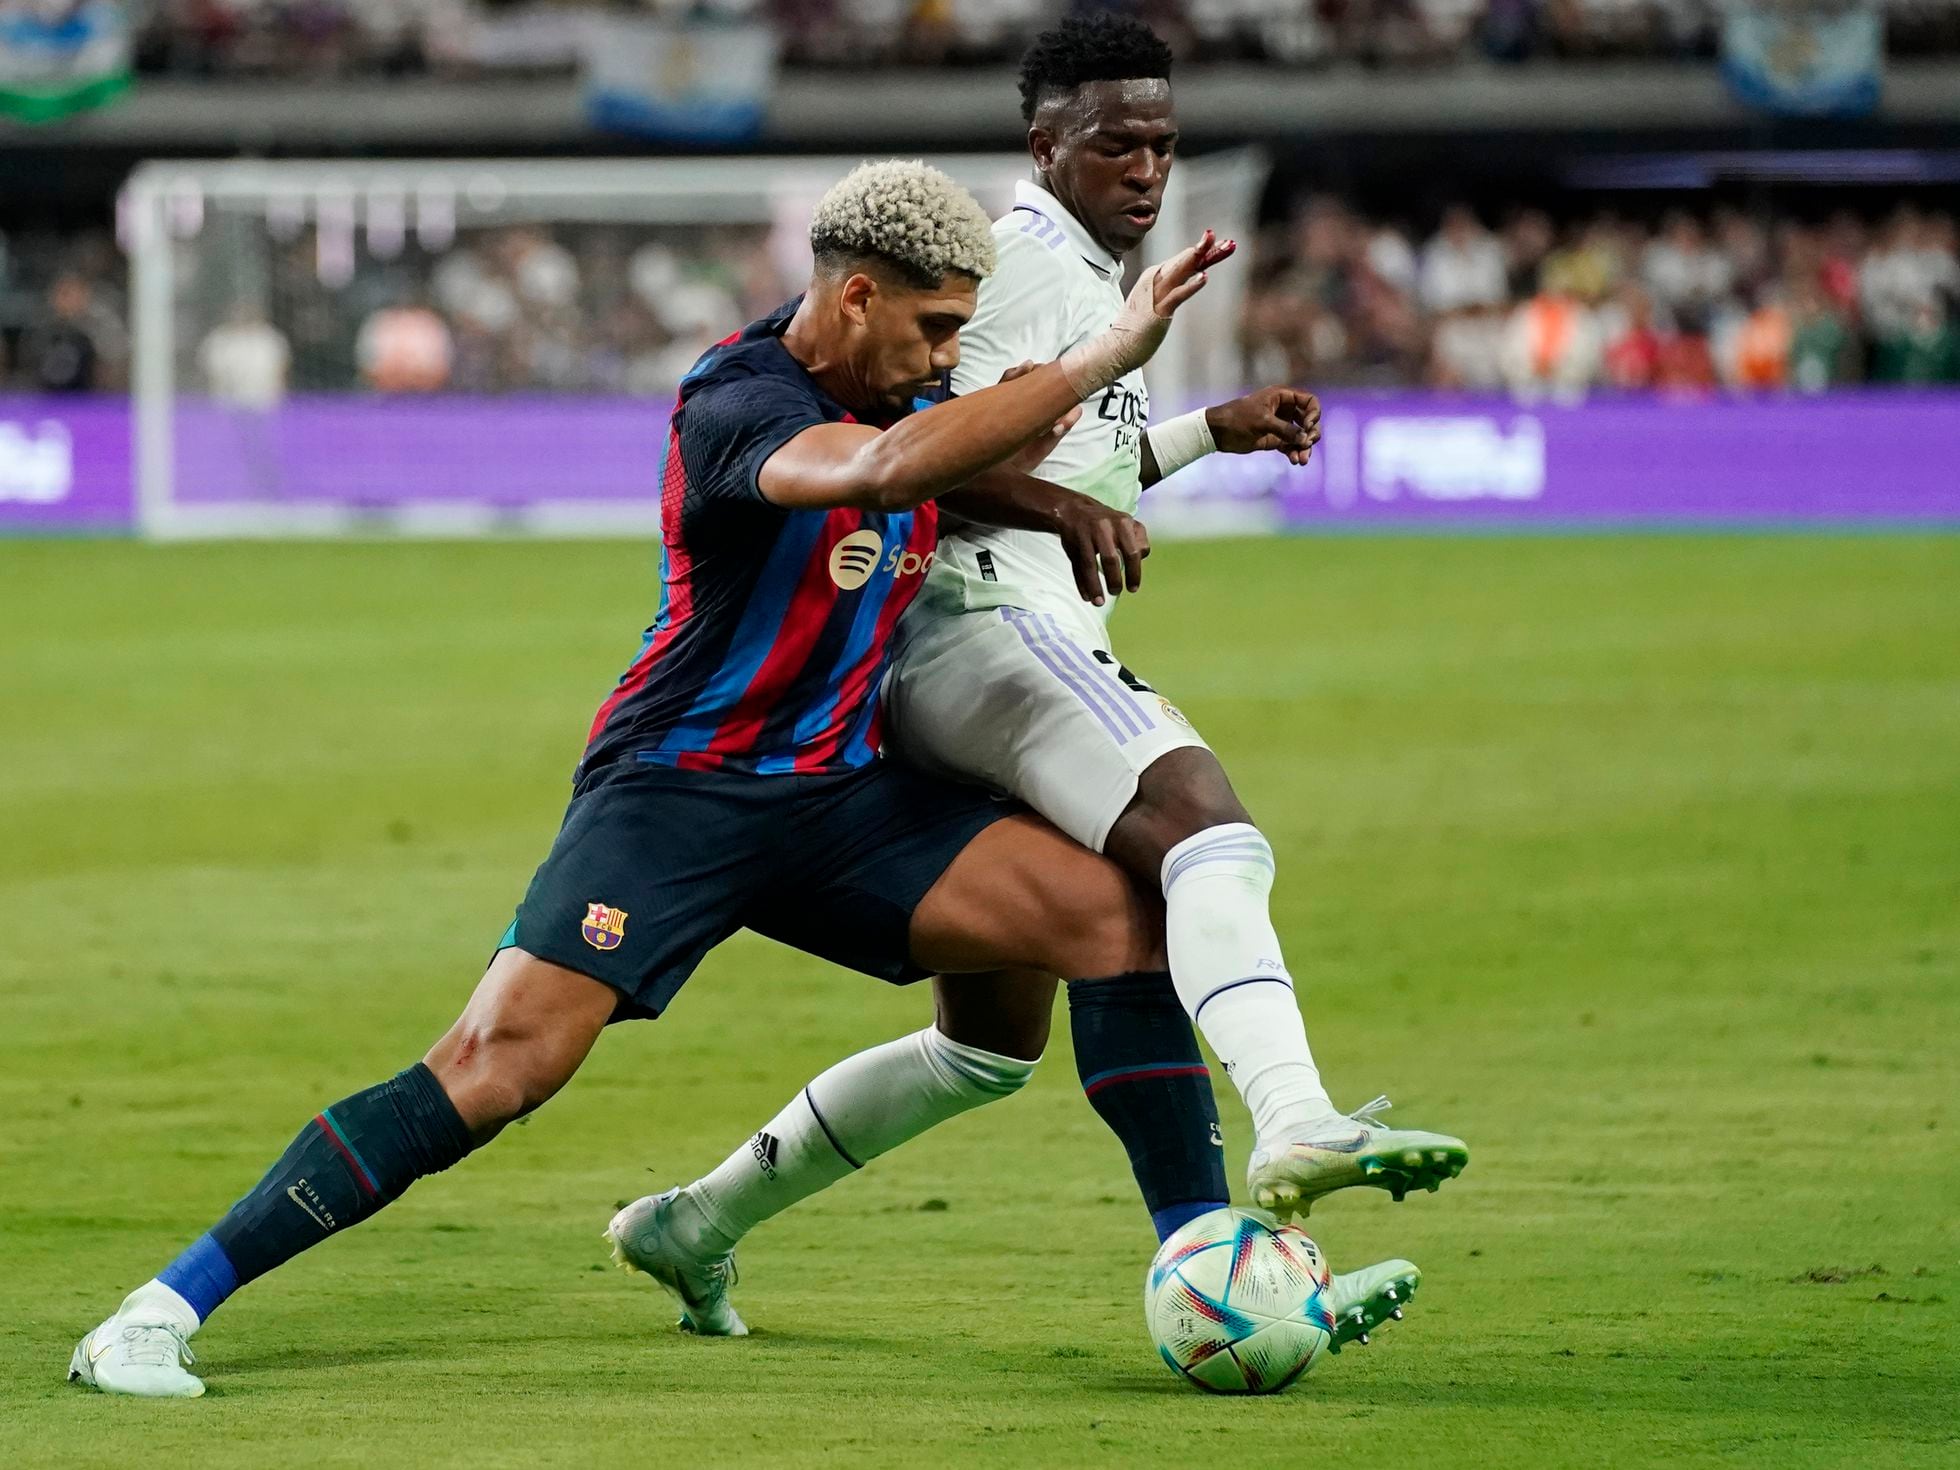 Ronald Araujo vs Vini is now more than just an El Clasico match, Ronаld ...